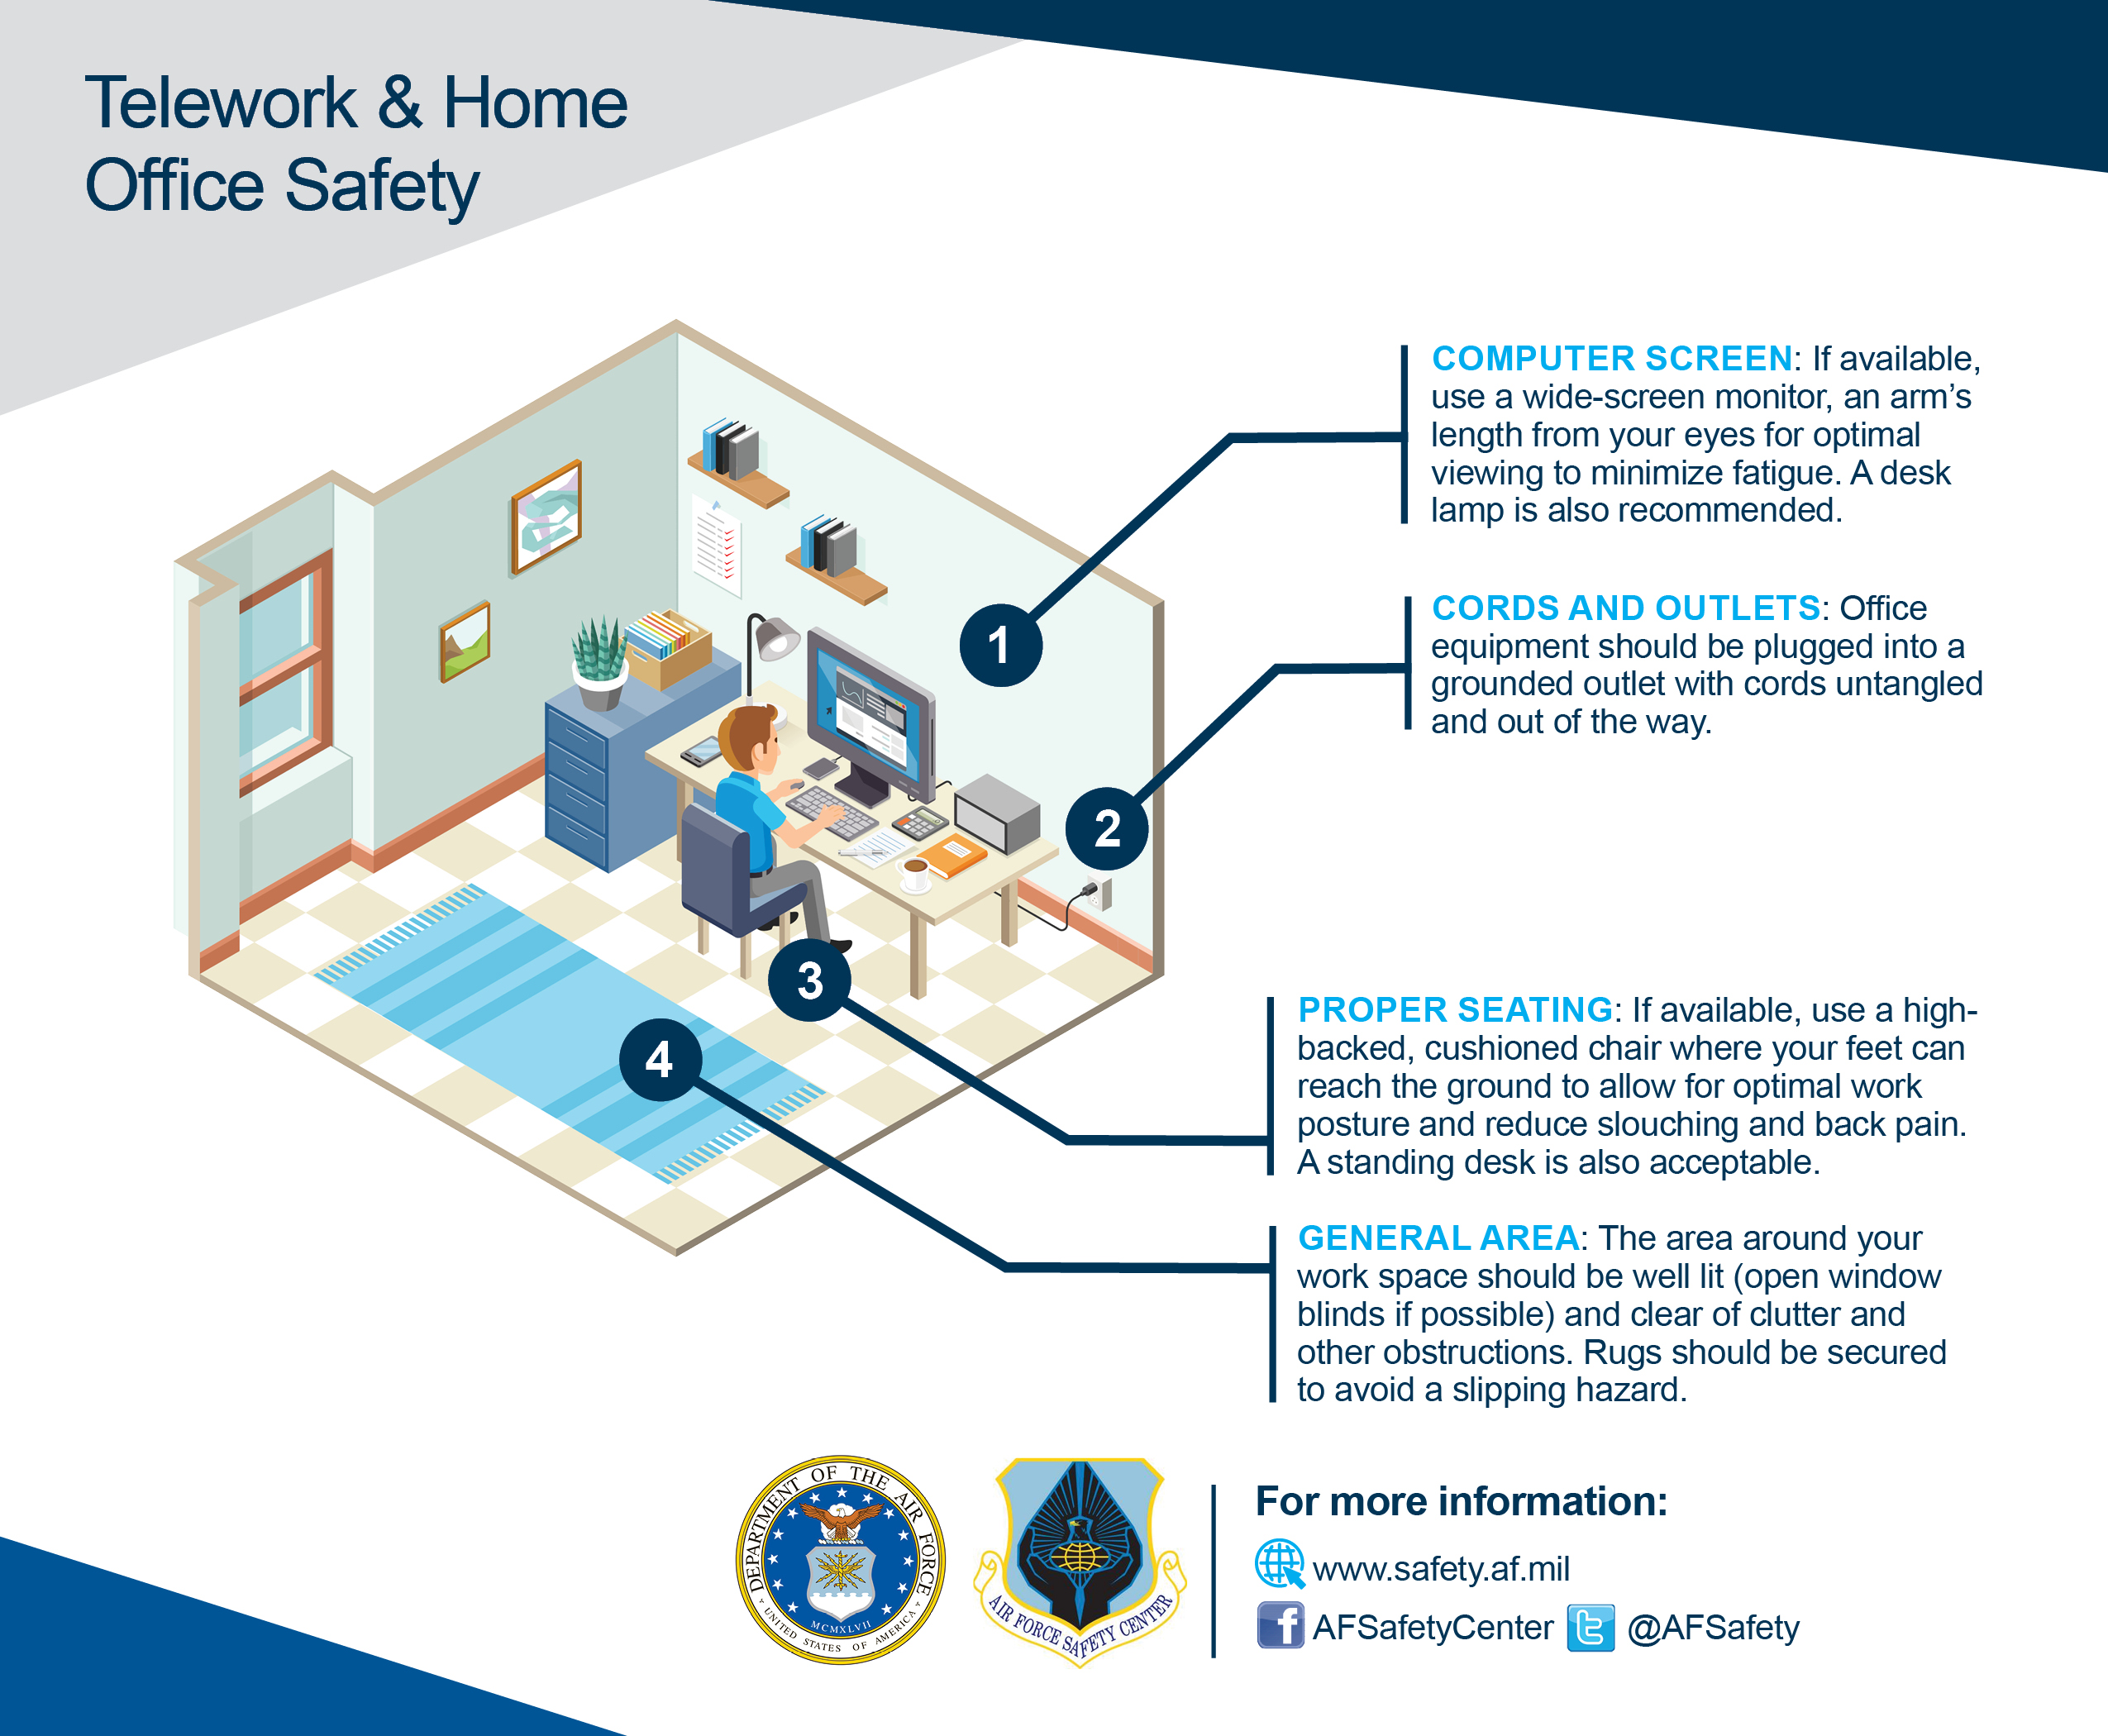 Telework & Home Office Safety poster